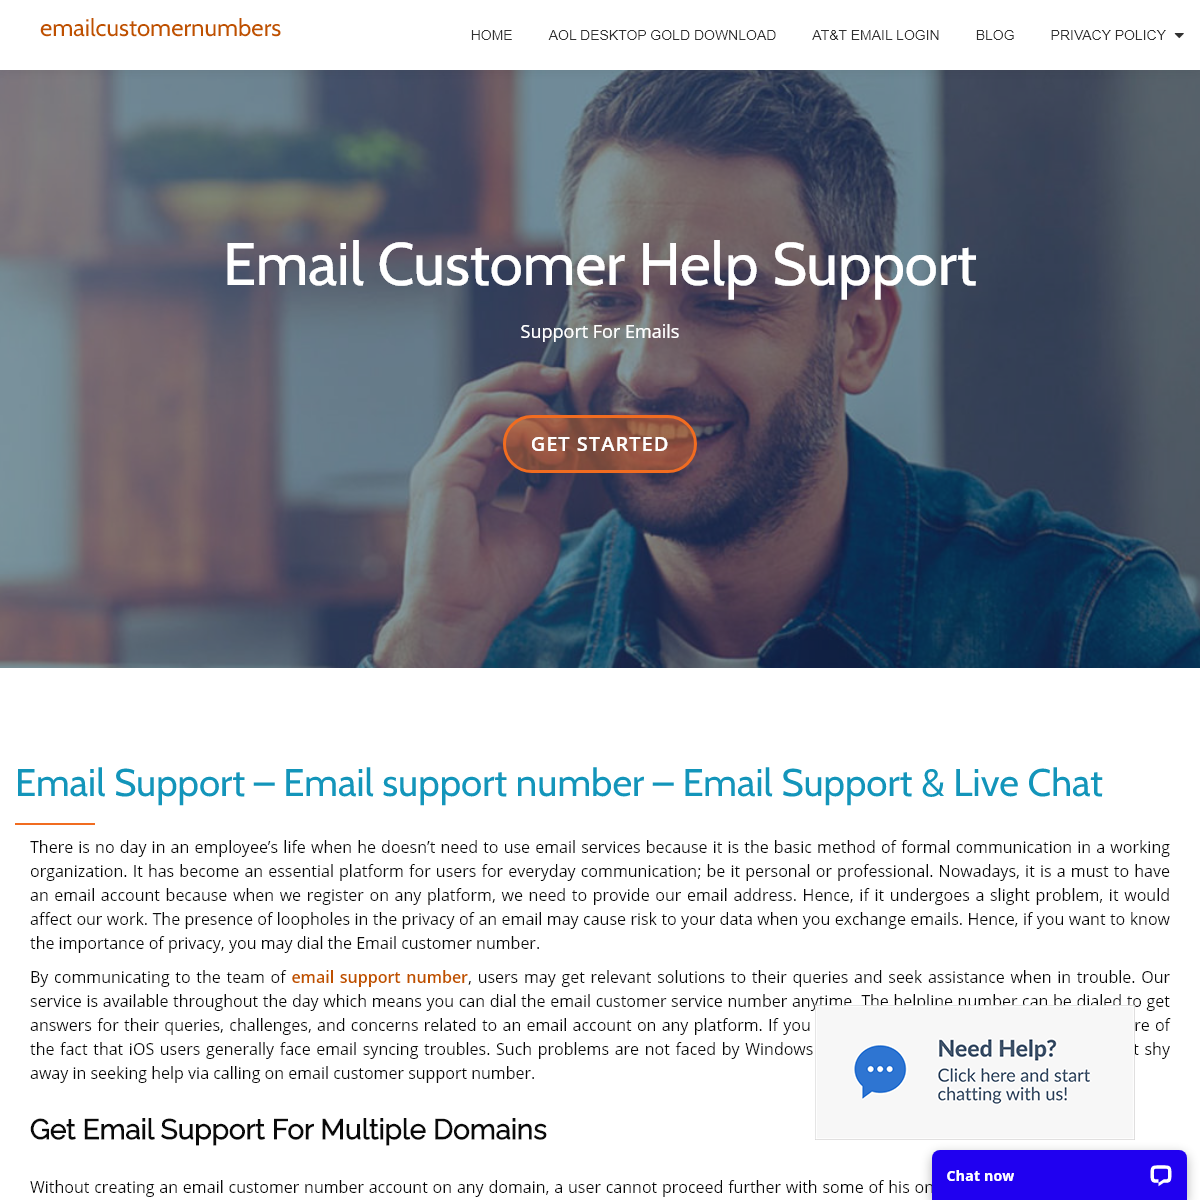 A complete backup of emailcustomernumbers.com